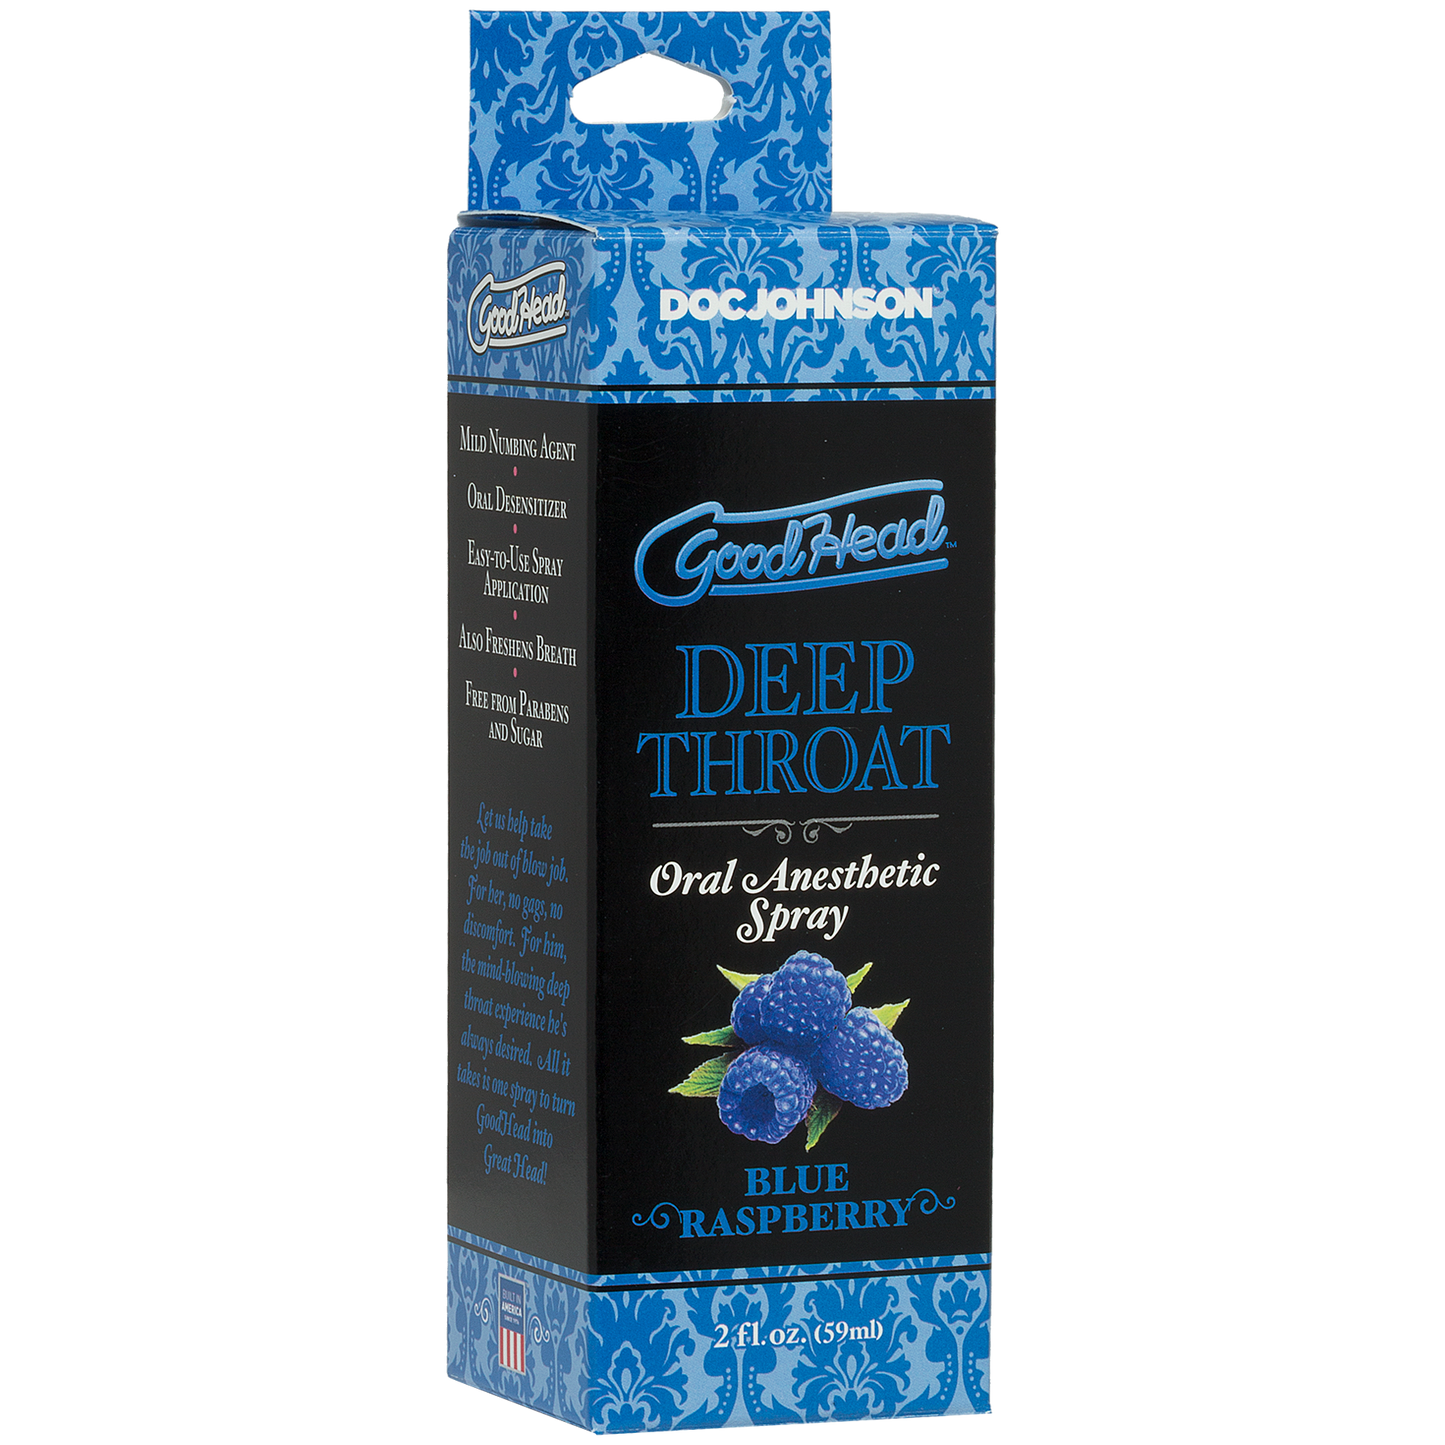 Deep Throat Oral Anesthetic Spray 2oz in its box (blue raspberry).